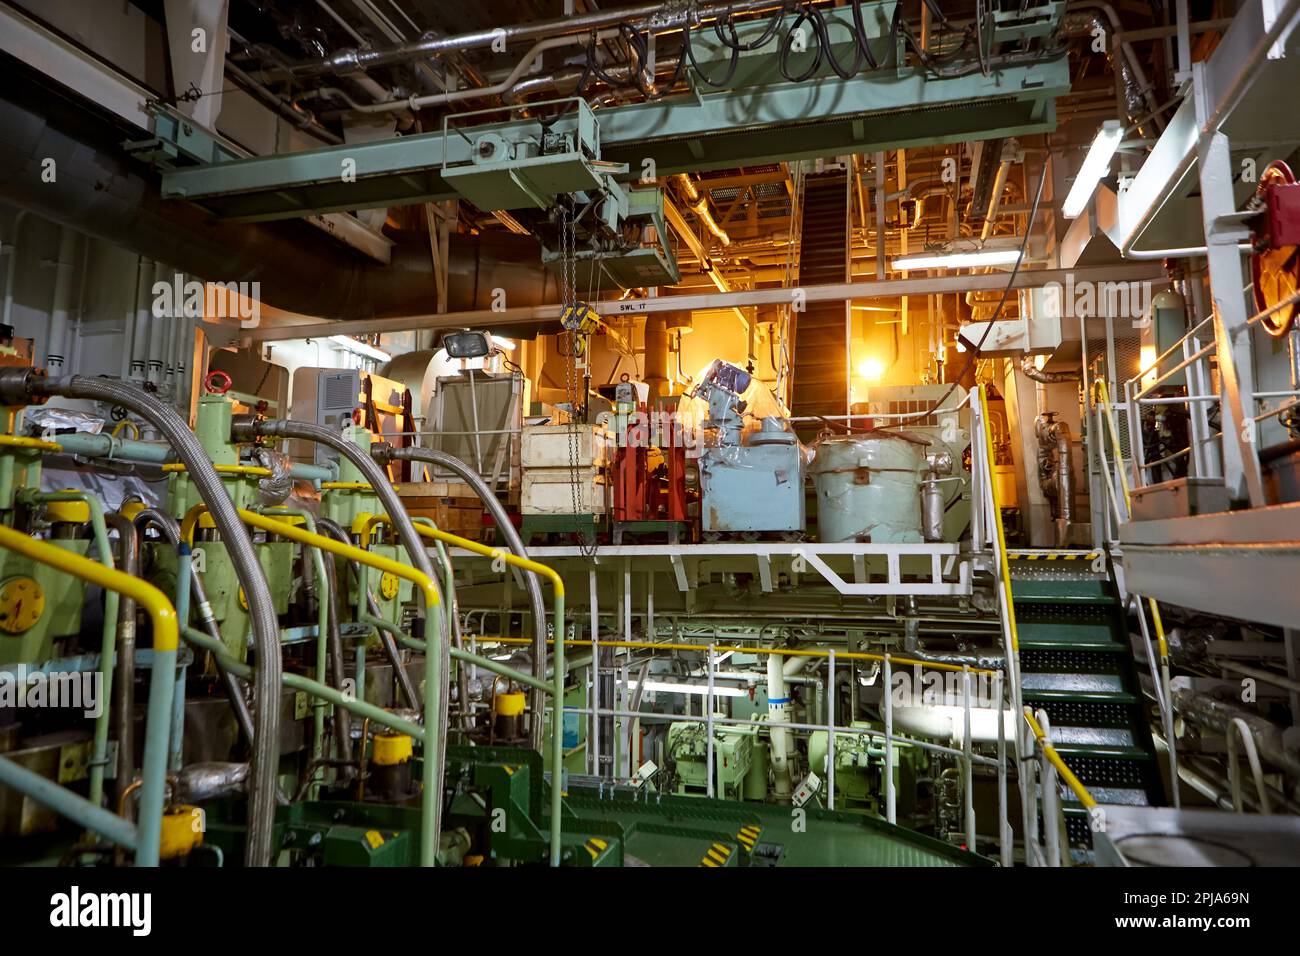 Ship's engine room. Vessel's ( Ship ) Engine Room Space / industrial stairs. Ship's Engine Heavy Machinery Space - Pipes, Valves, Engines Stock Photo